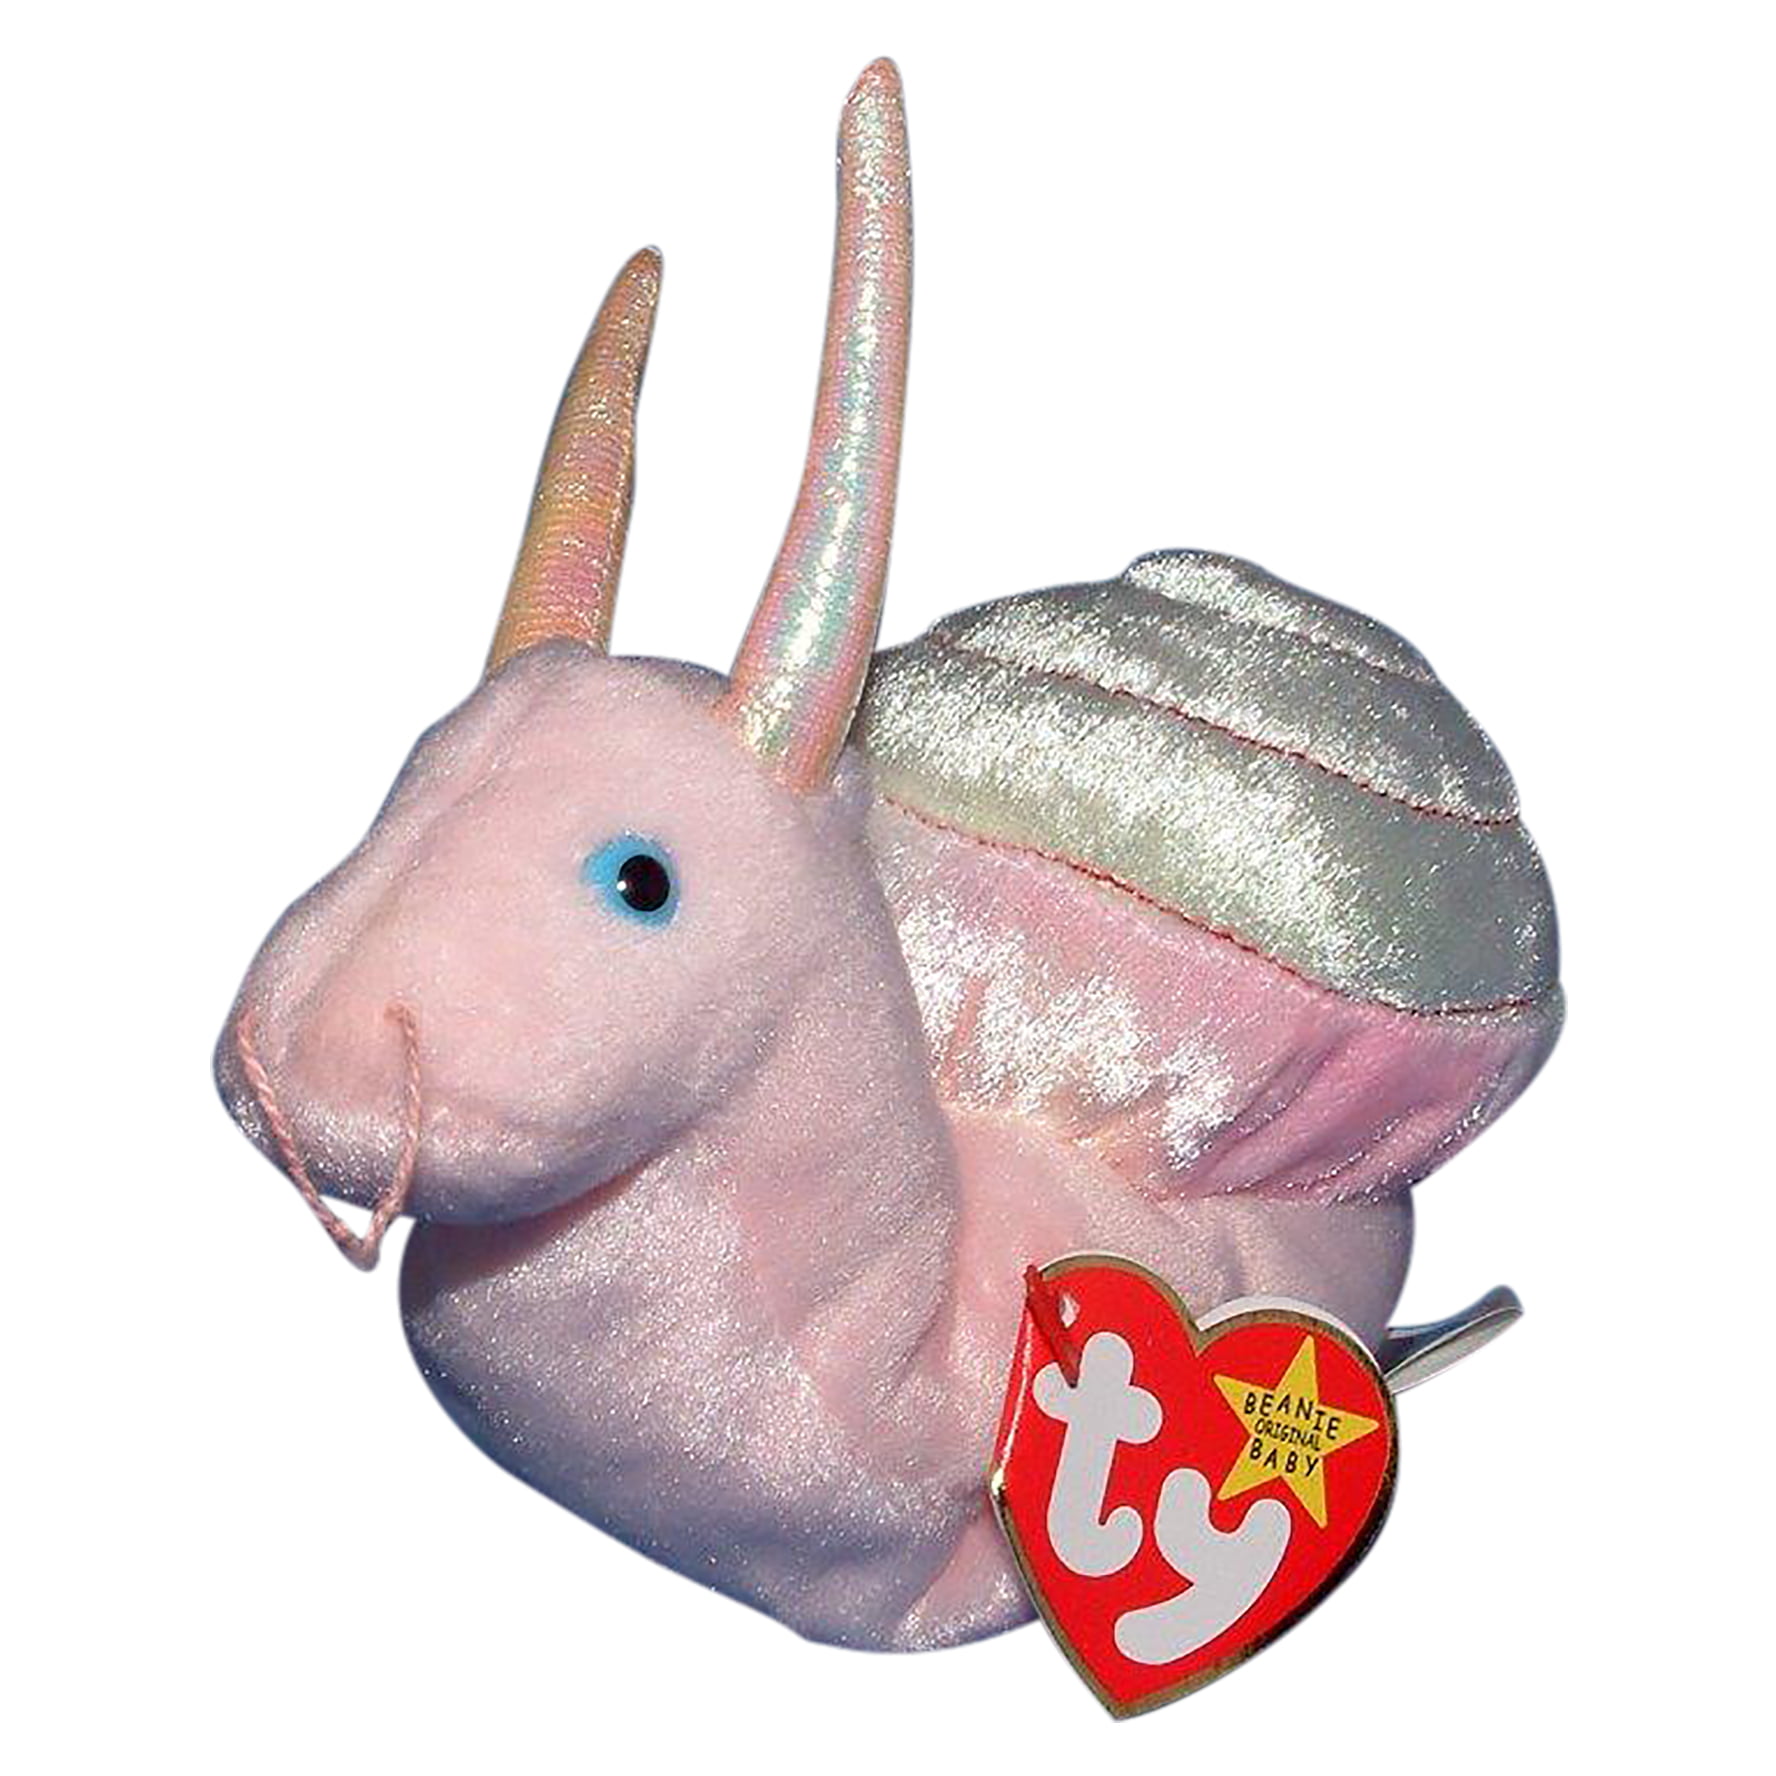 Swirly the Snail Plush Toy - for sale online 0008421042494 Ty Beanie Babies 